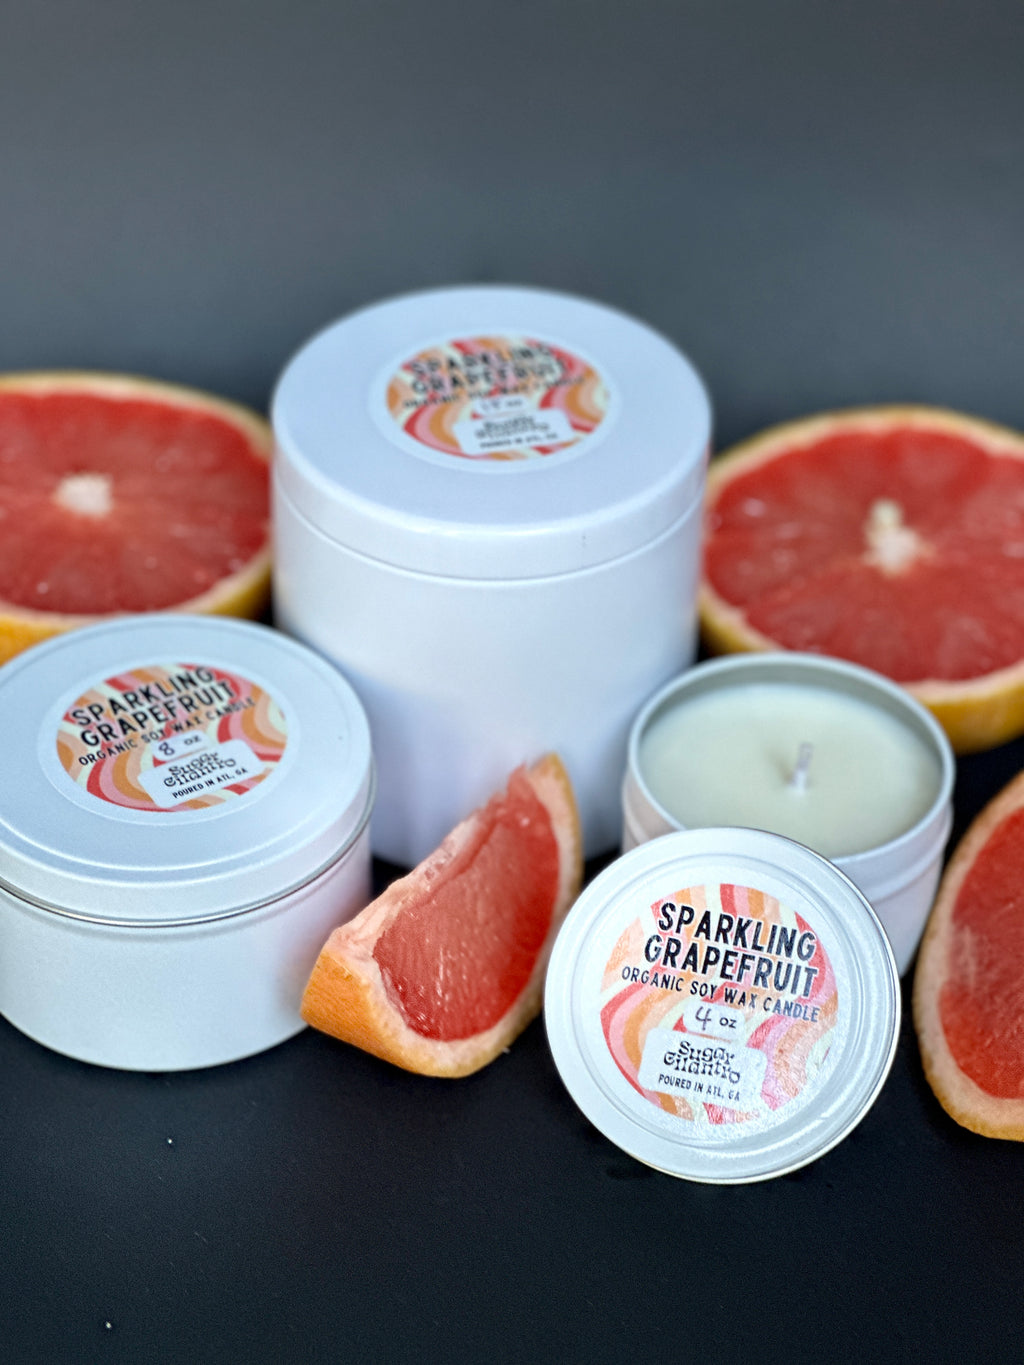 Sparkling Grapefruit Soy Wax Candle